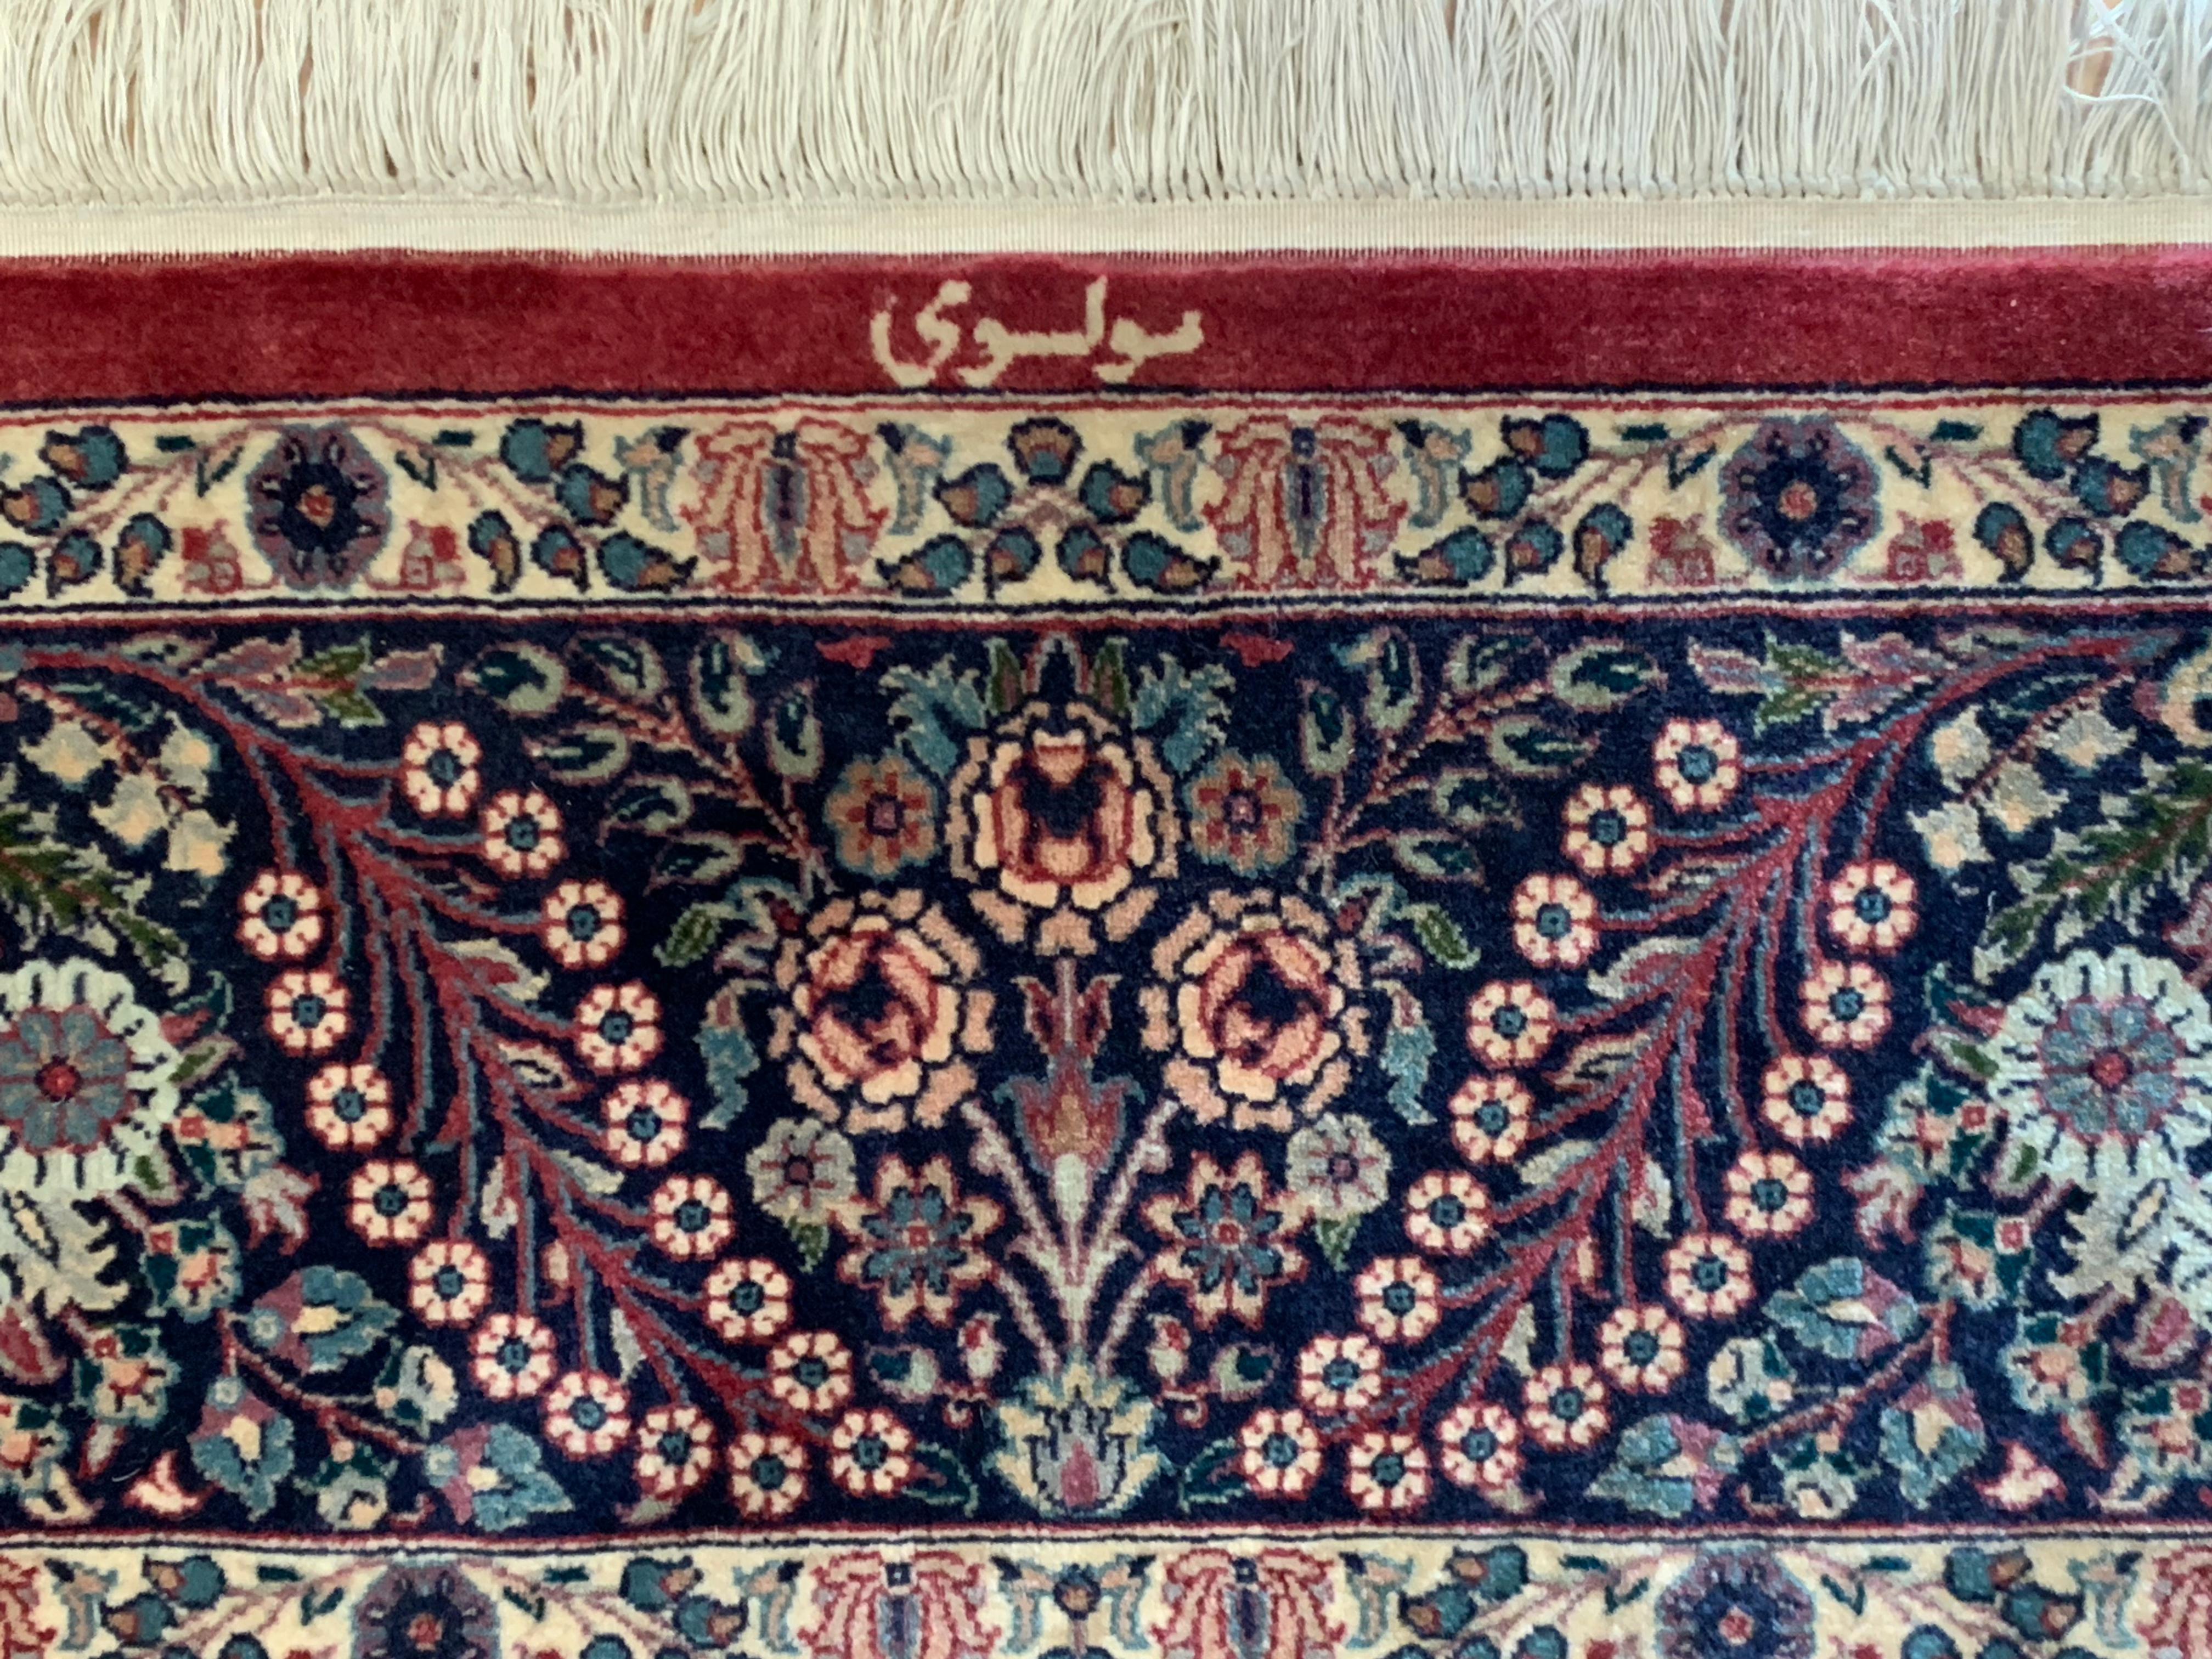 Signed Vintage Persian Kashan Rug, Very Fine, circa 1980s For Sale 2